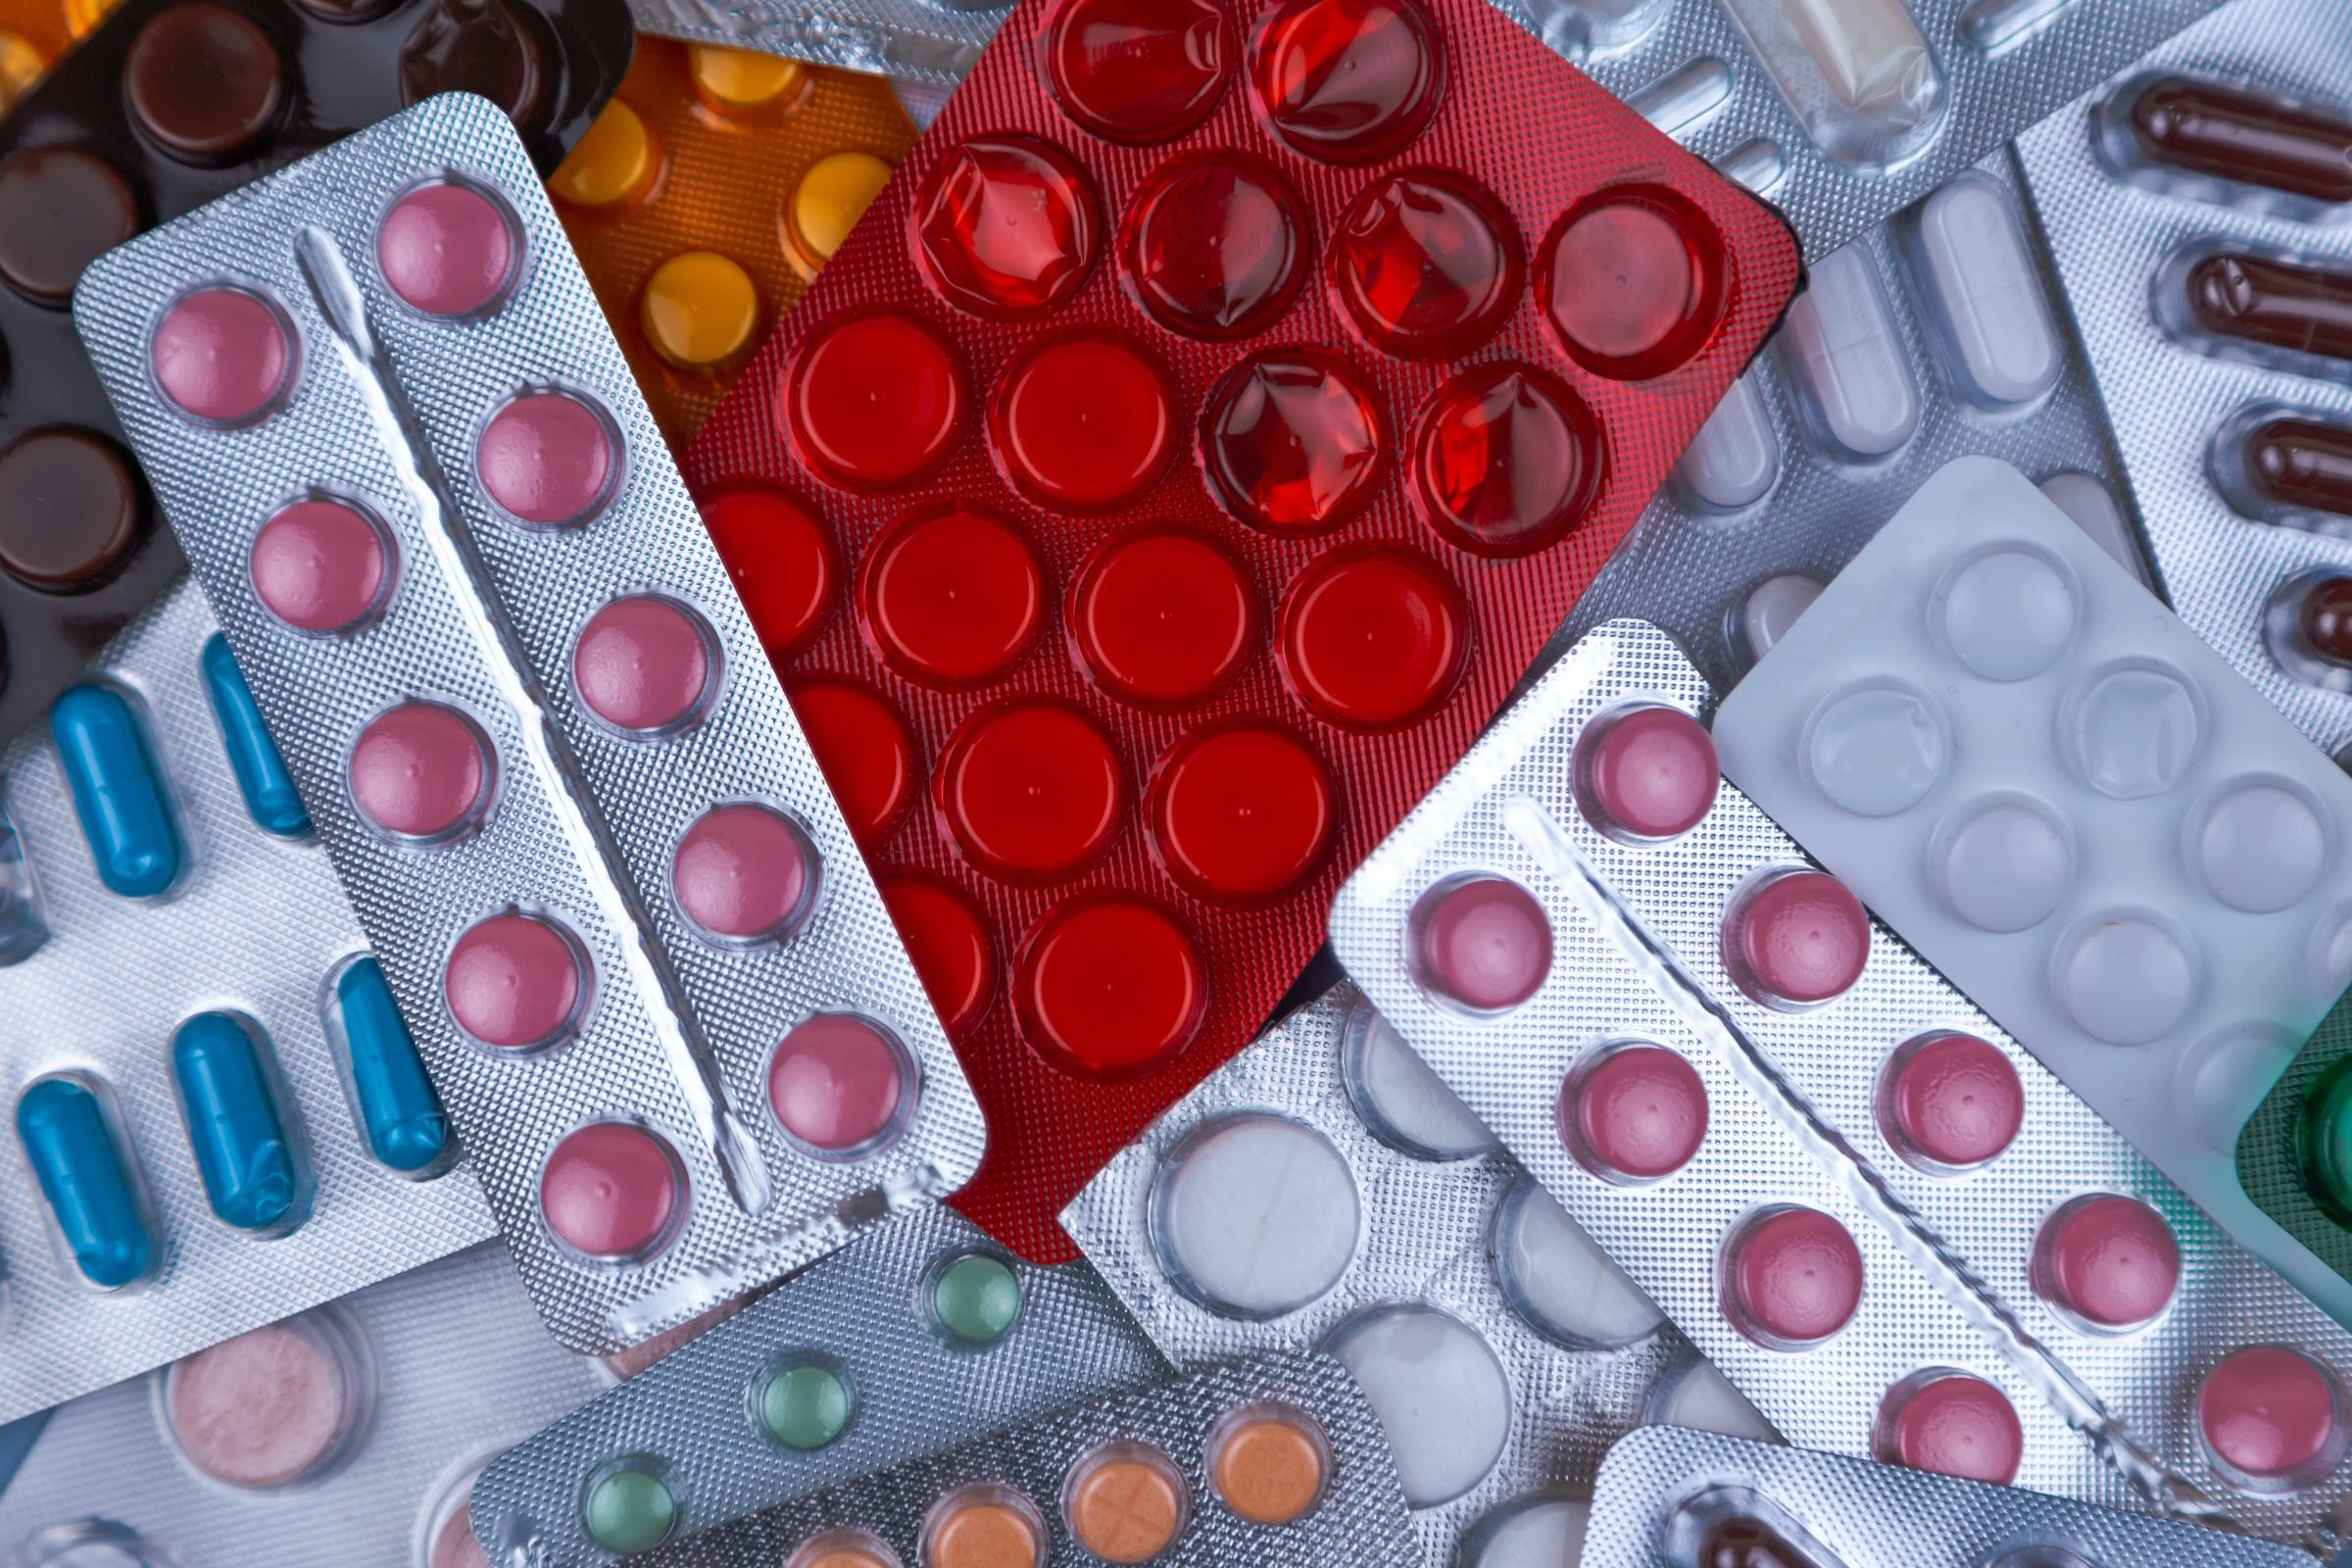 Falsified medicines in Colombia – analysis from an anti-corruption perspective